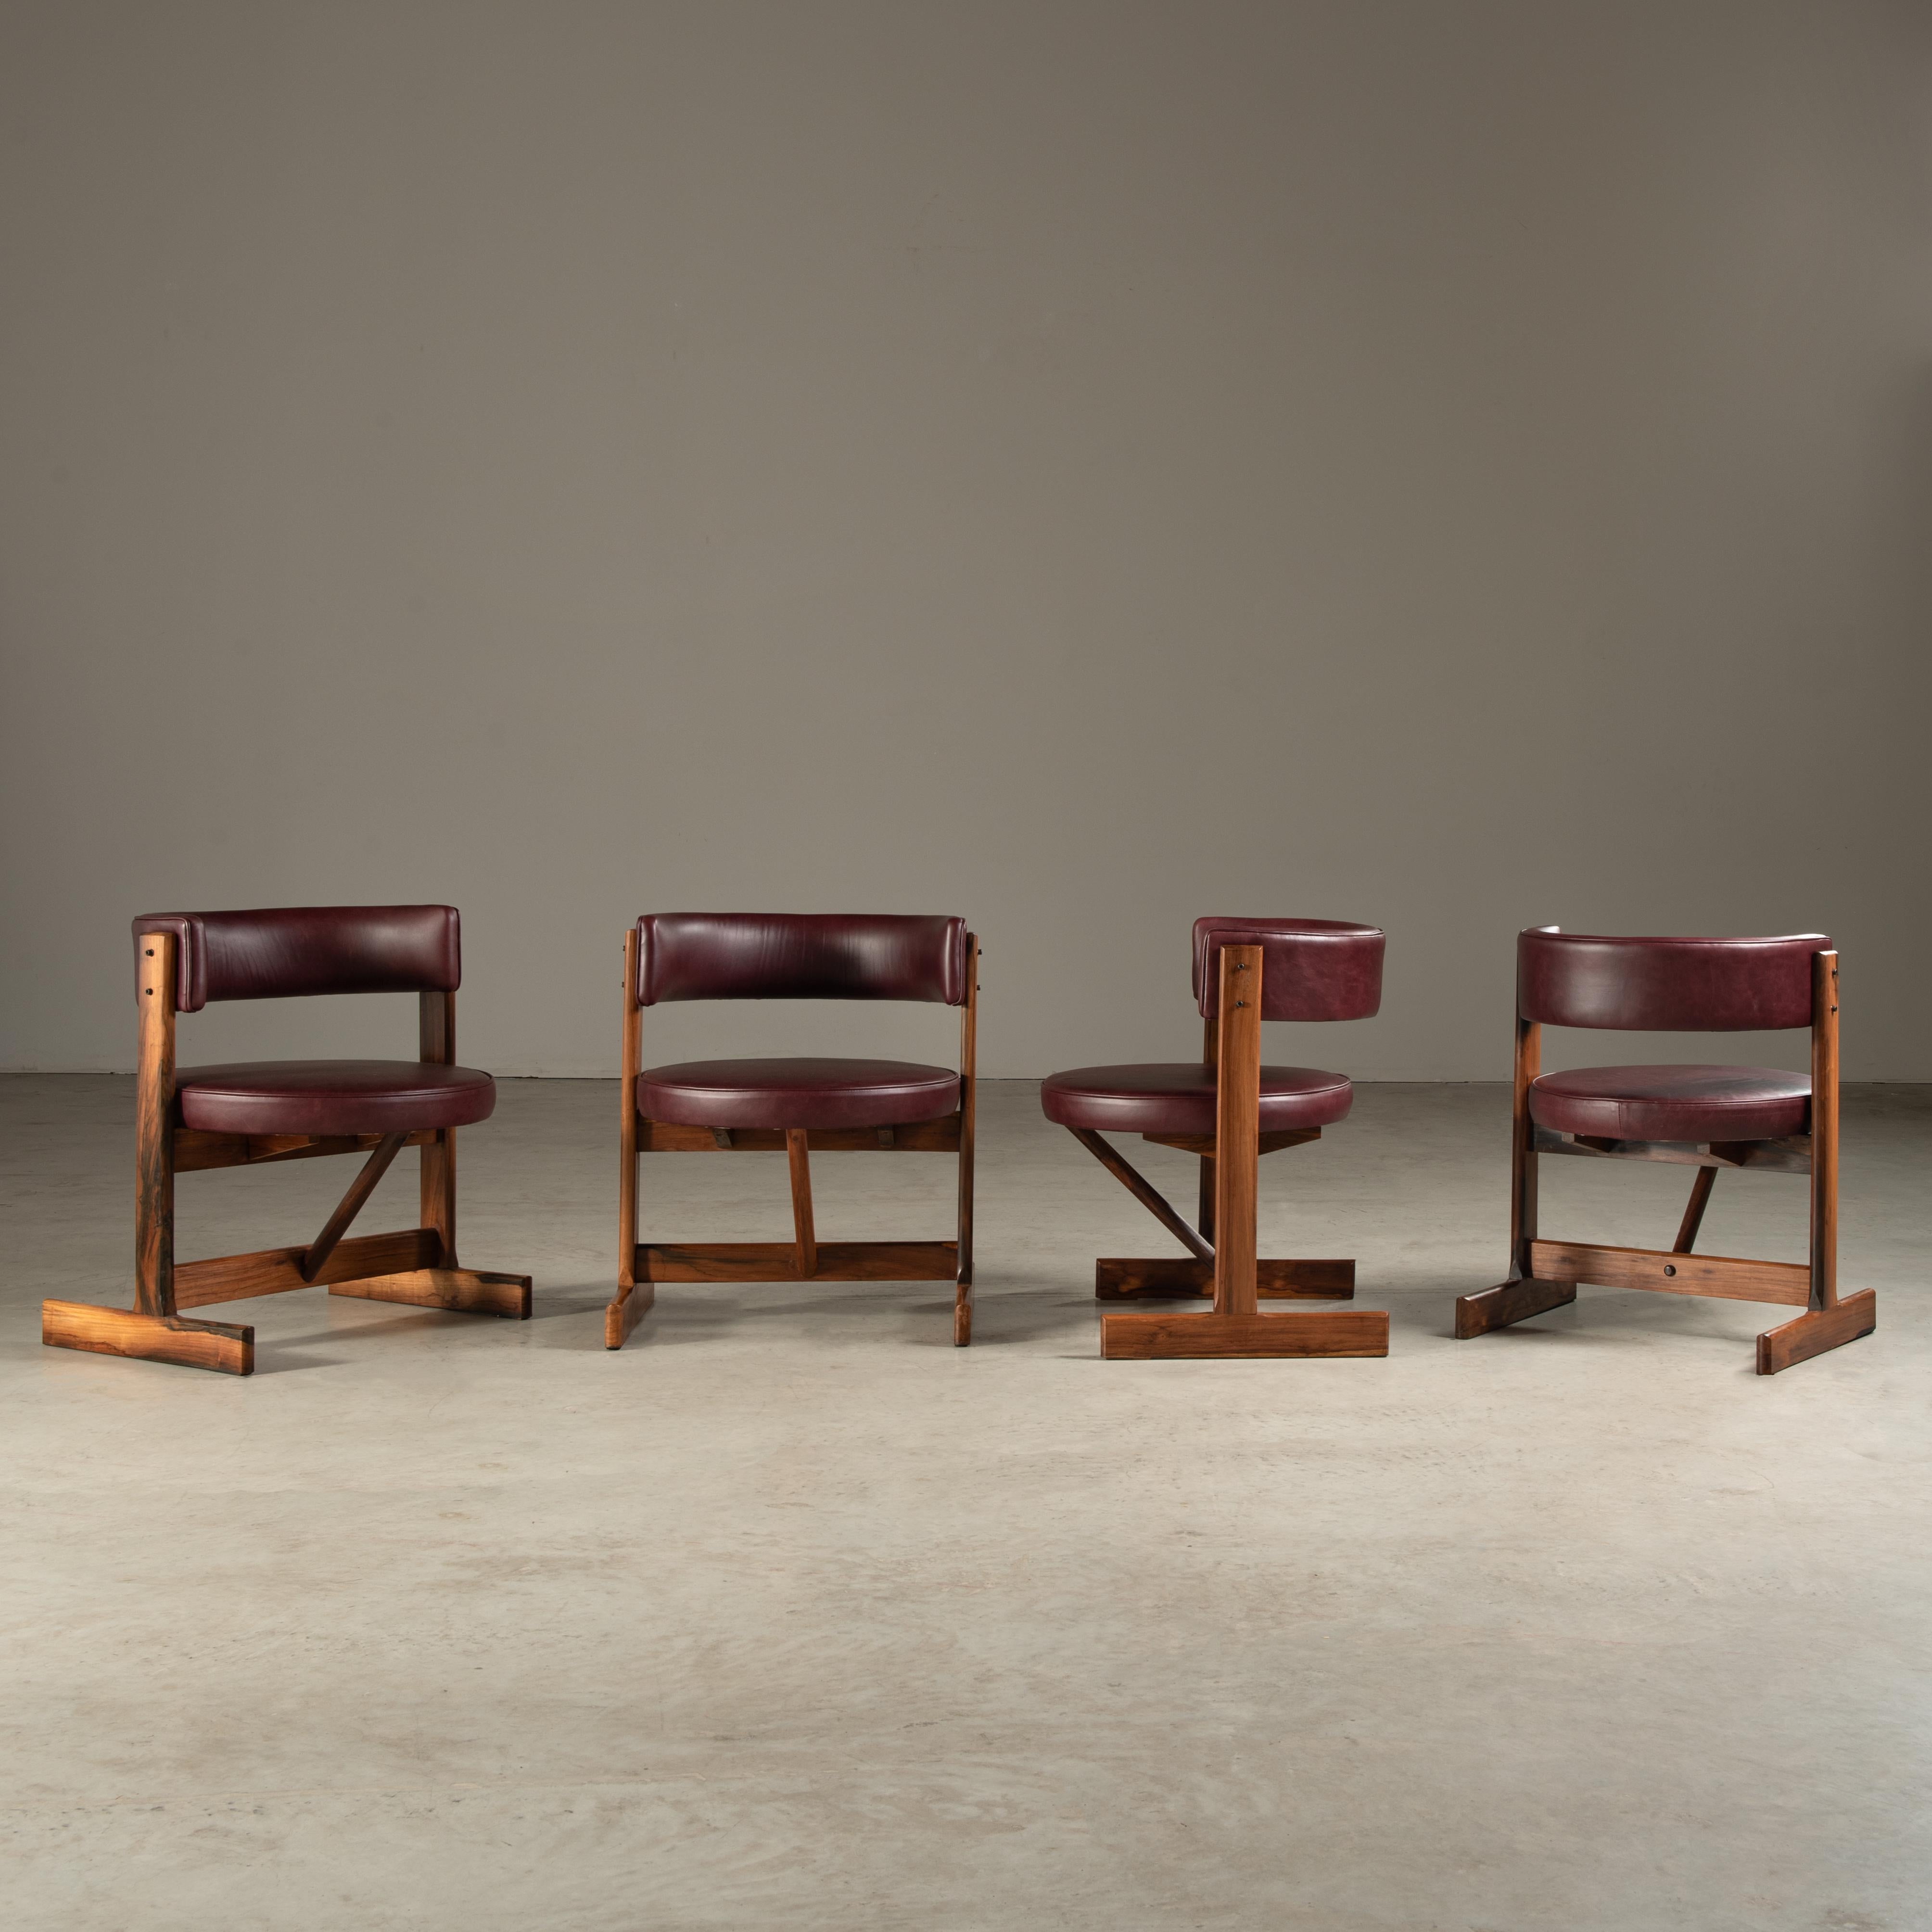 These beautiful and unique chairs are a distinctive piece of Brazilian mid-century furniture that showcases the special blend of material craftsmanship and design simplicity that was prevalent during the 20th century in Brazil. Even though the